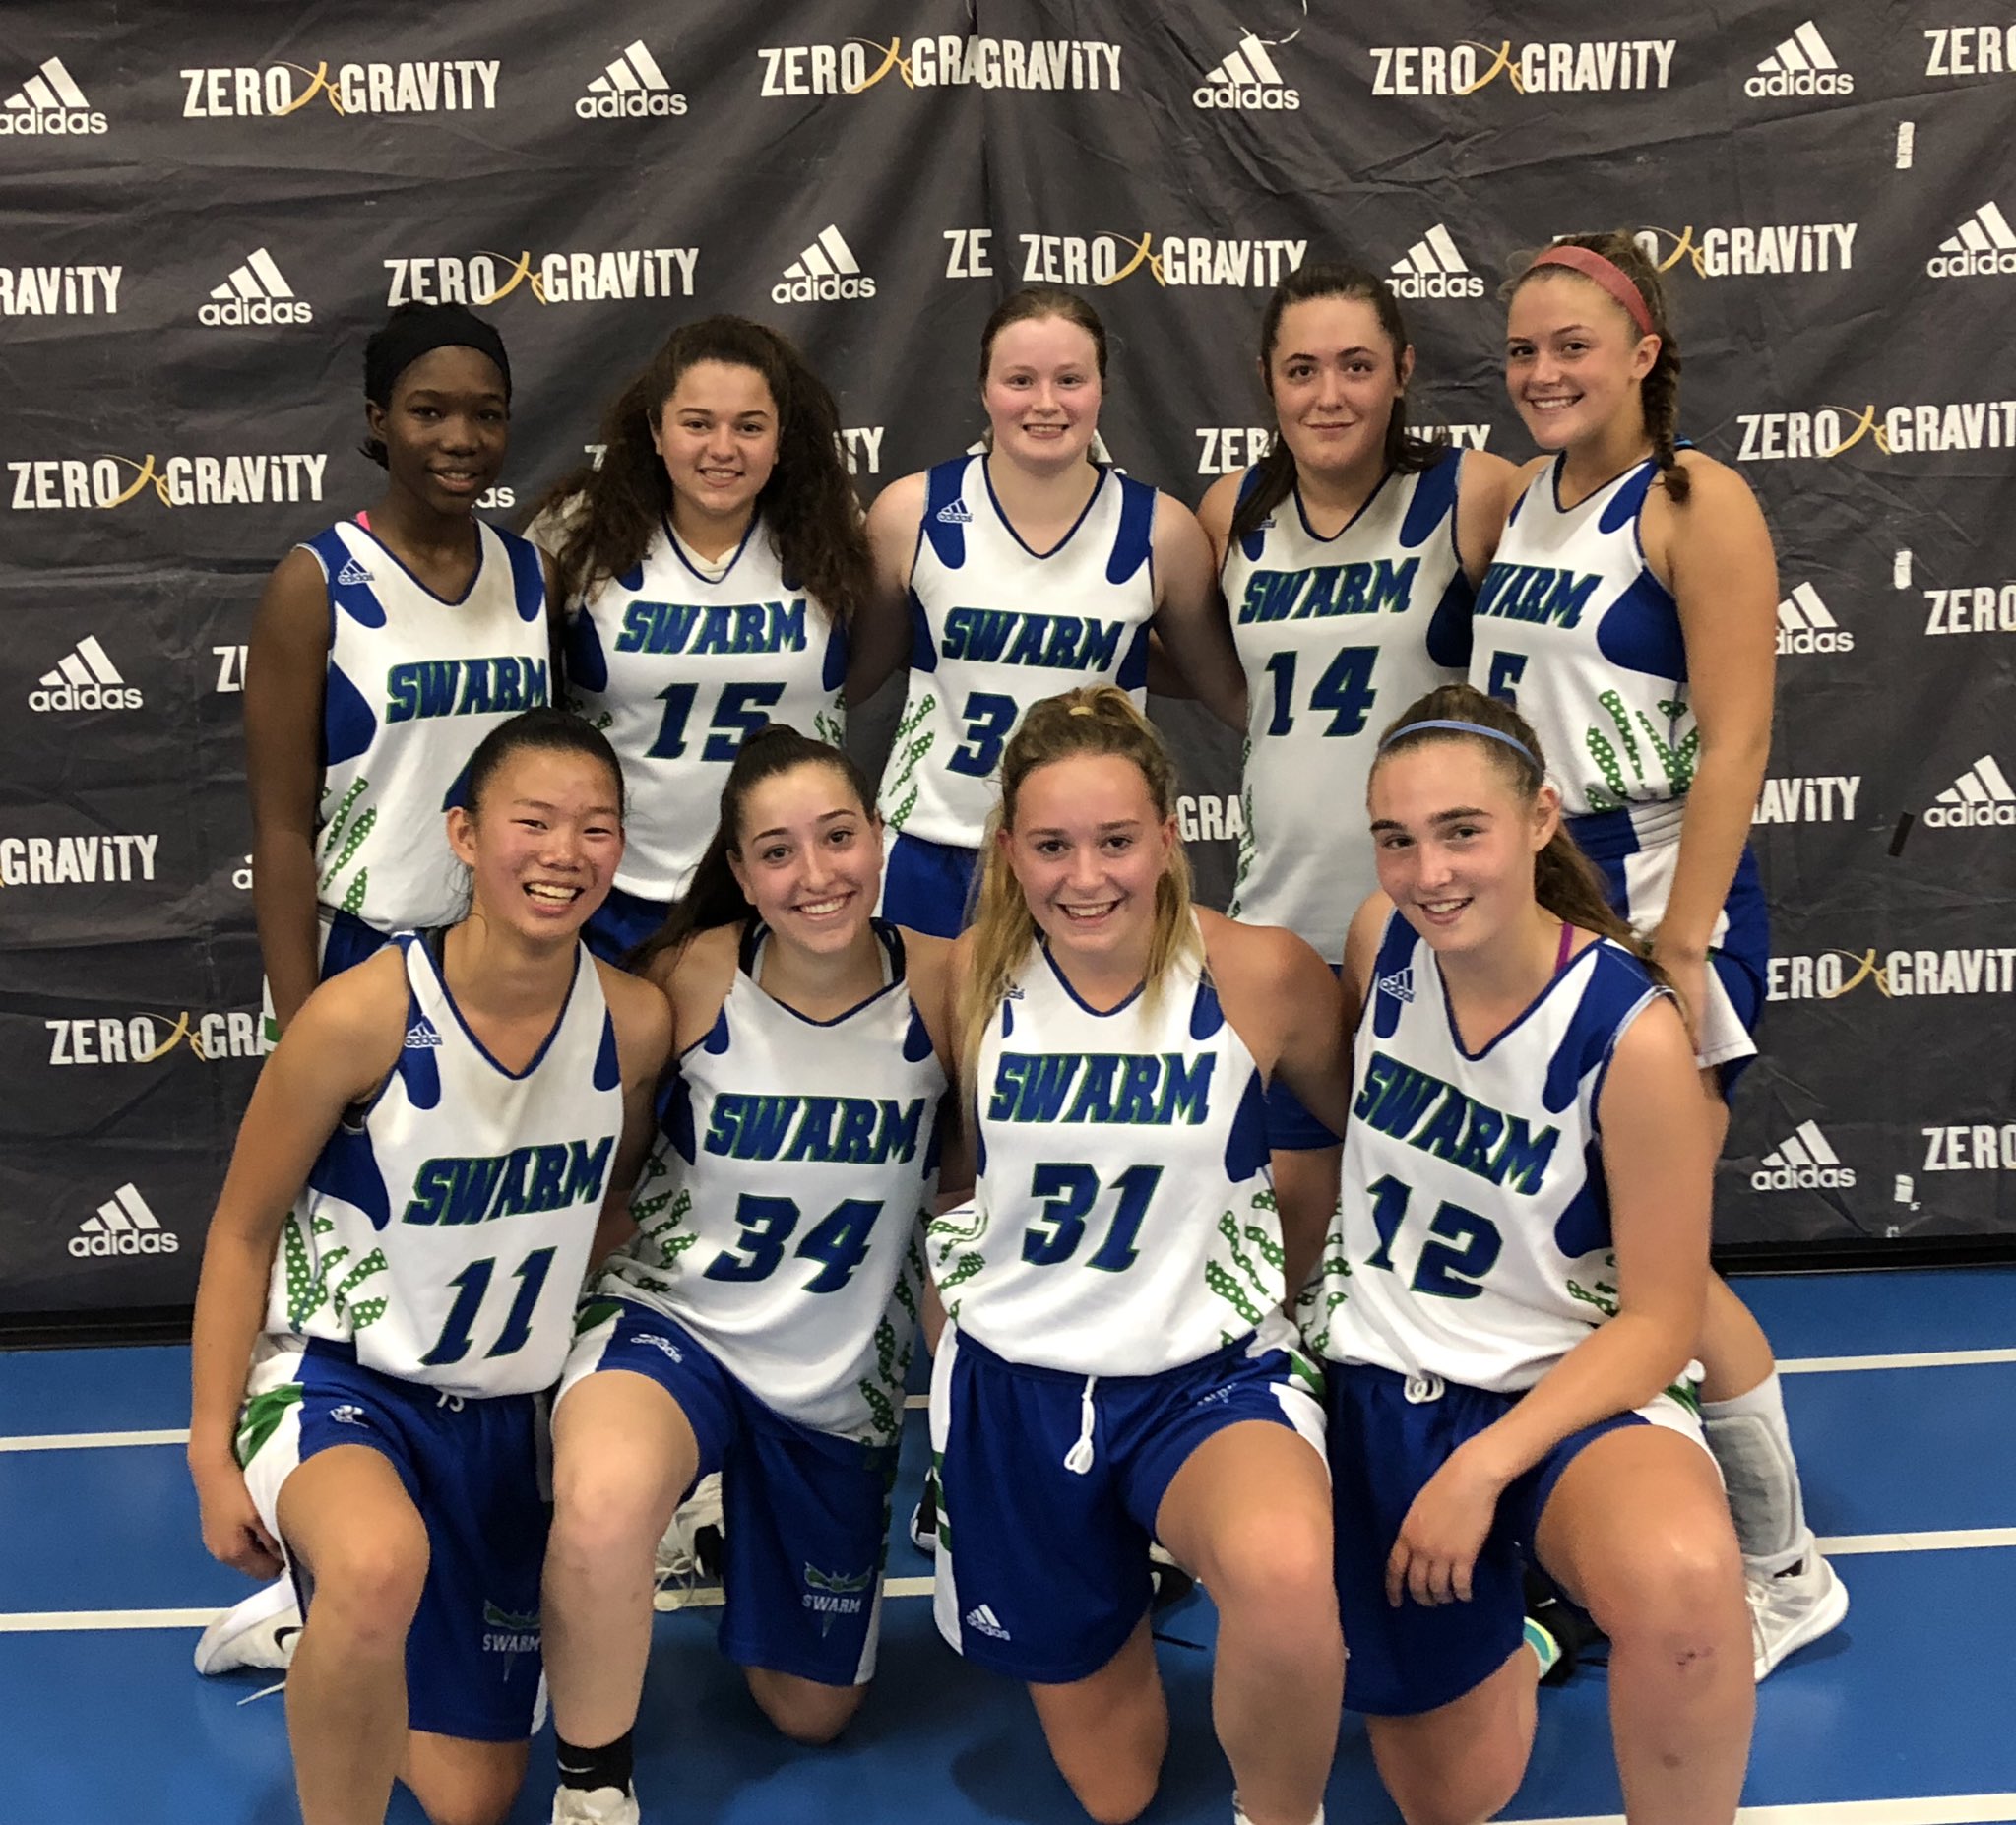 Rhode Swarm on Twitter: "Coach Corey's High School Girls Team the day with a solid win over Mass Illusions 49-35! #swarmnation #rhodeisland #basketball #aau #aaubasketball https://t.co/ASJXqy26Dw" / Twitter